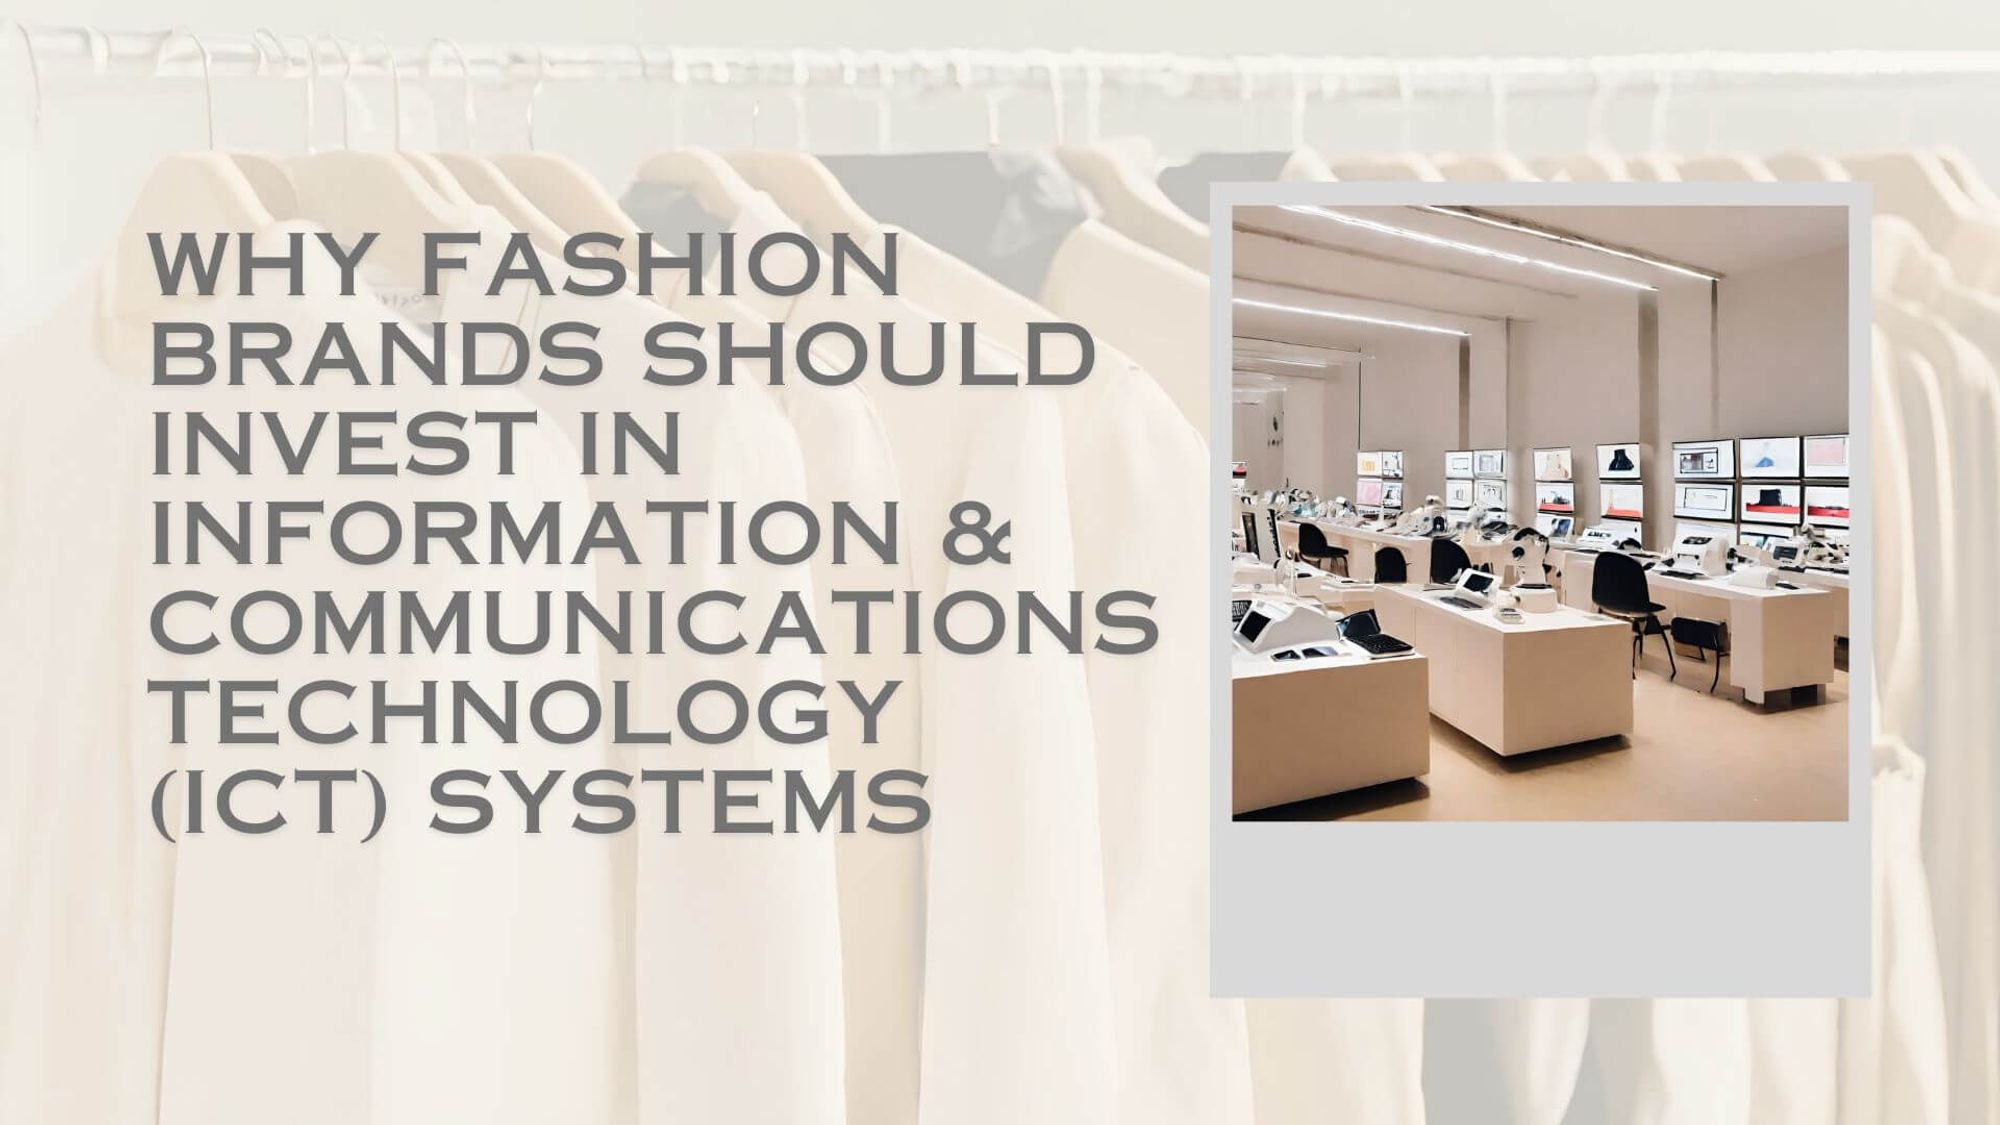 Why Fashion Brands Should Invest in Information and Communications Technology (ICT)
Systems – And How